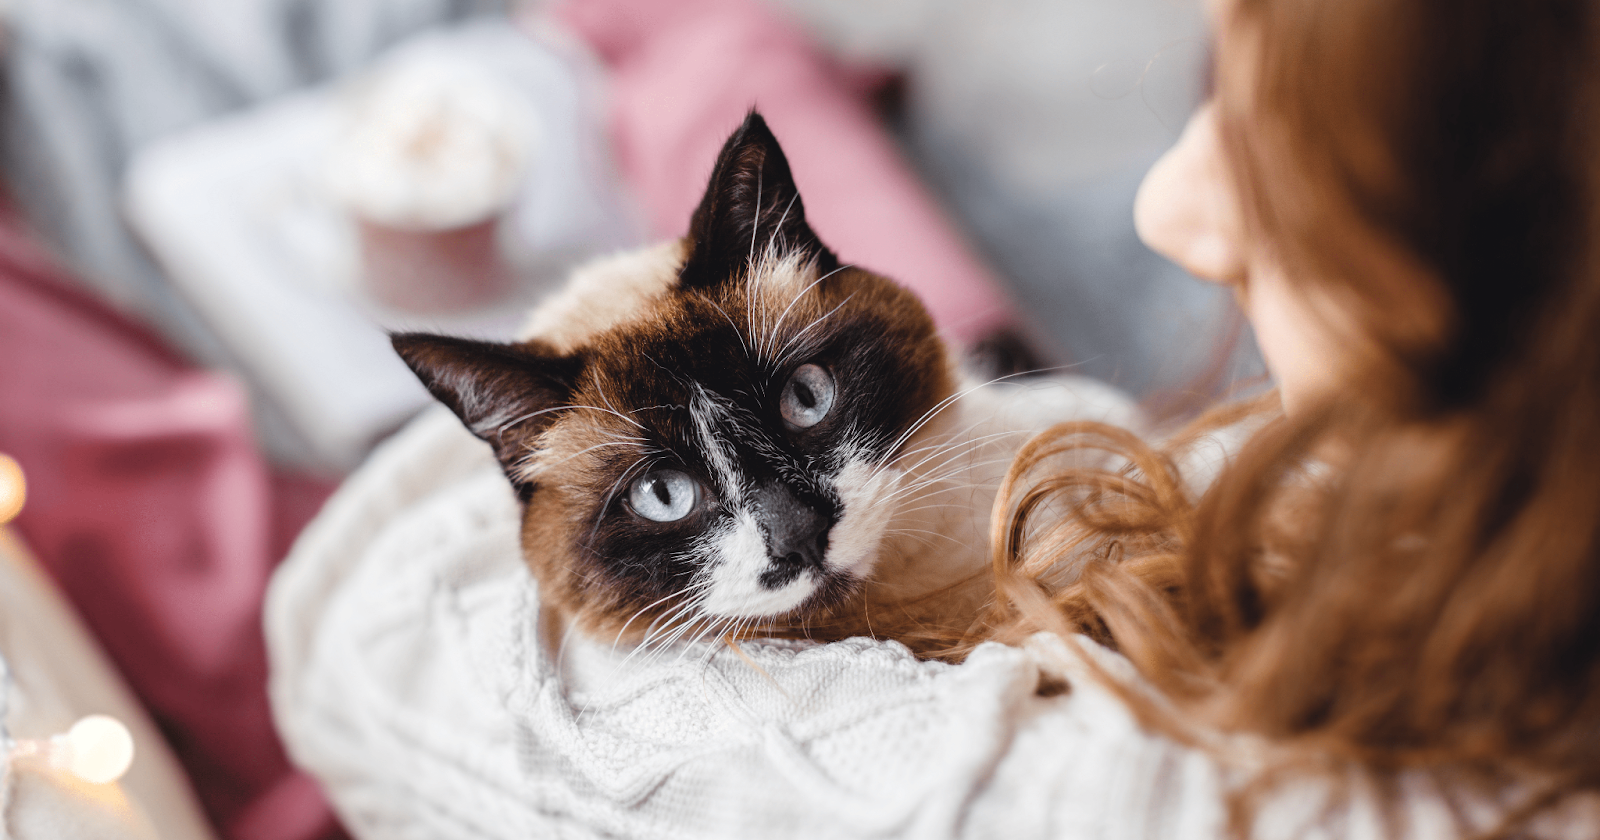 Woman sitting on couch cuddling with cat